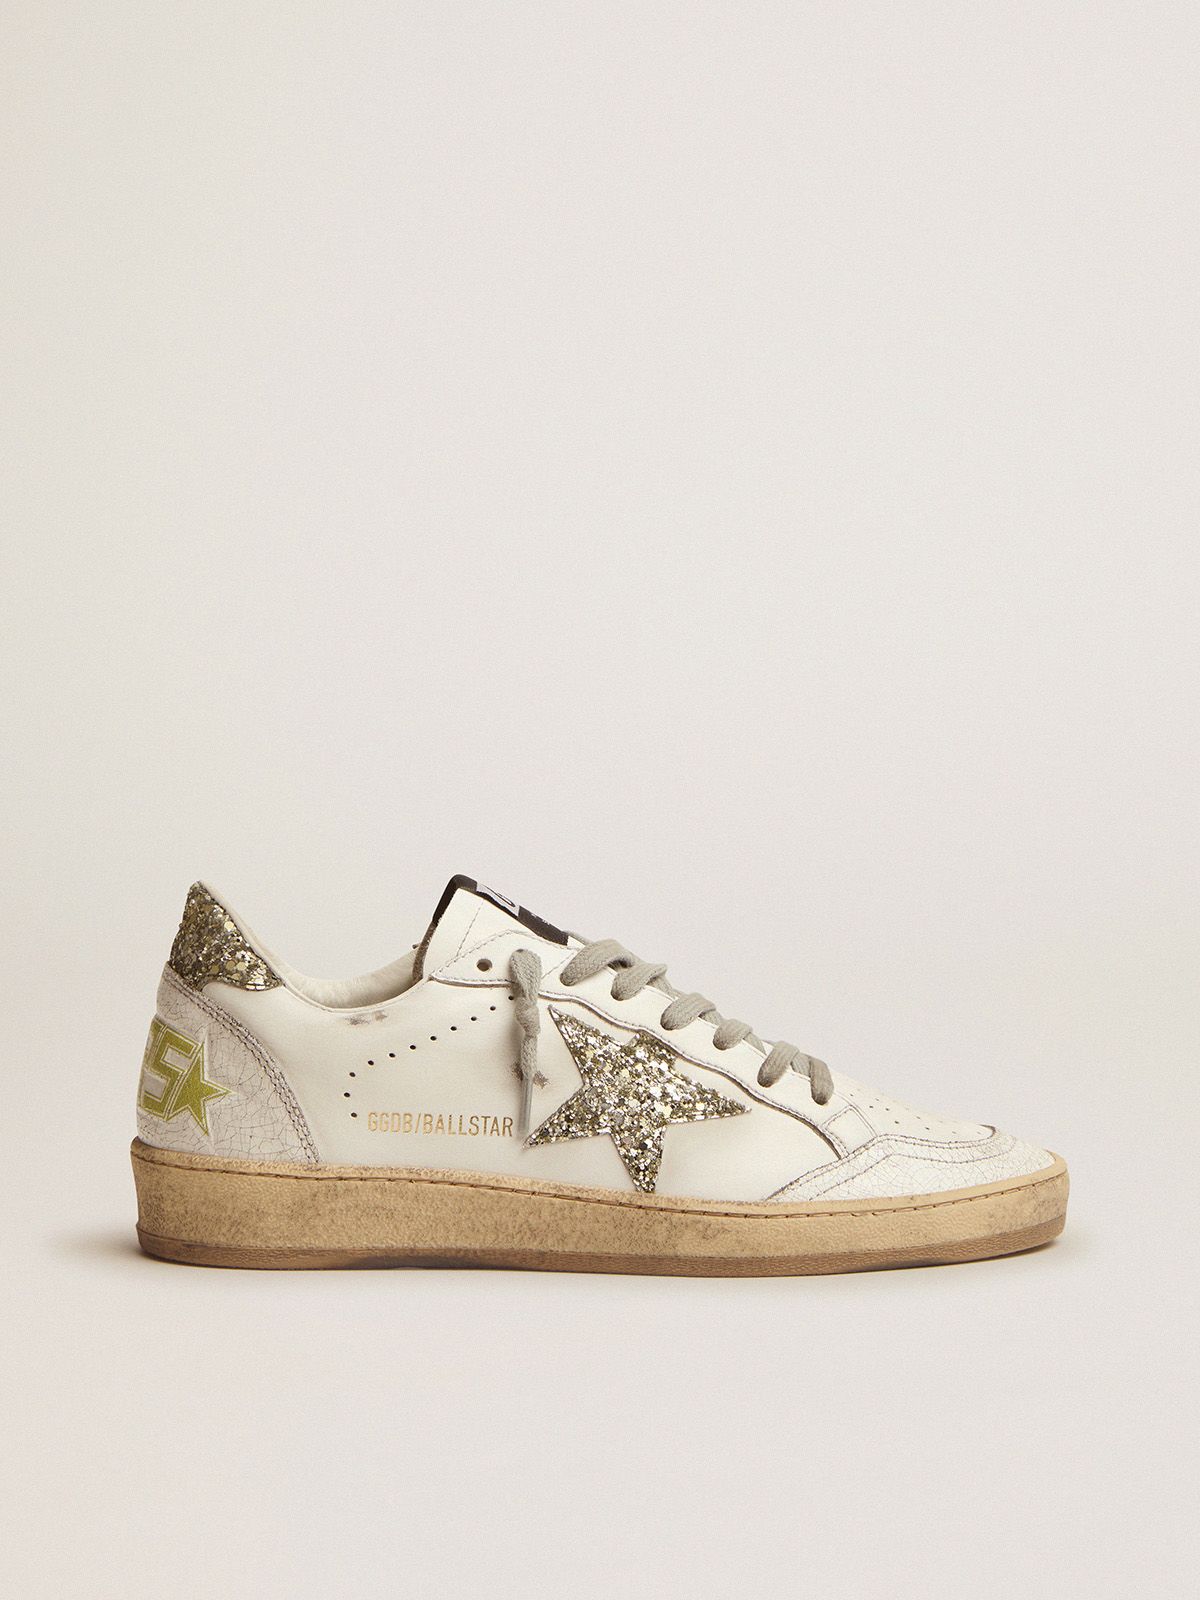 Ball Star LTD sneakers in white leather with light green glitter | 